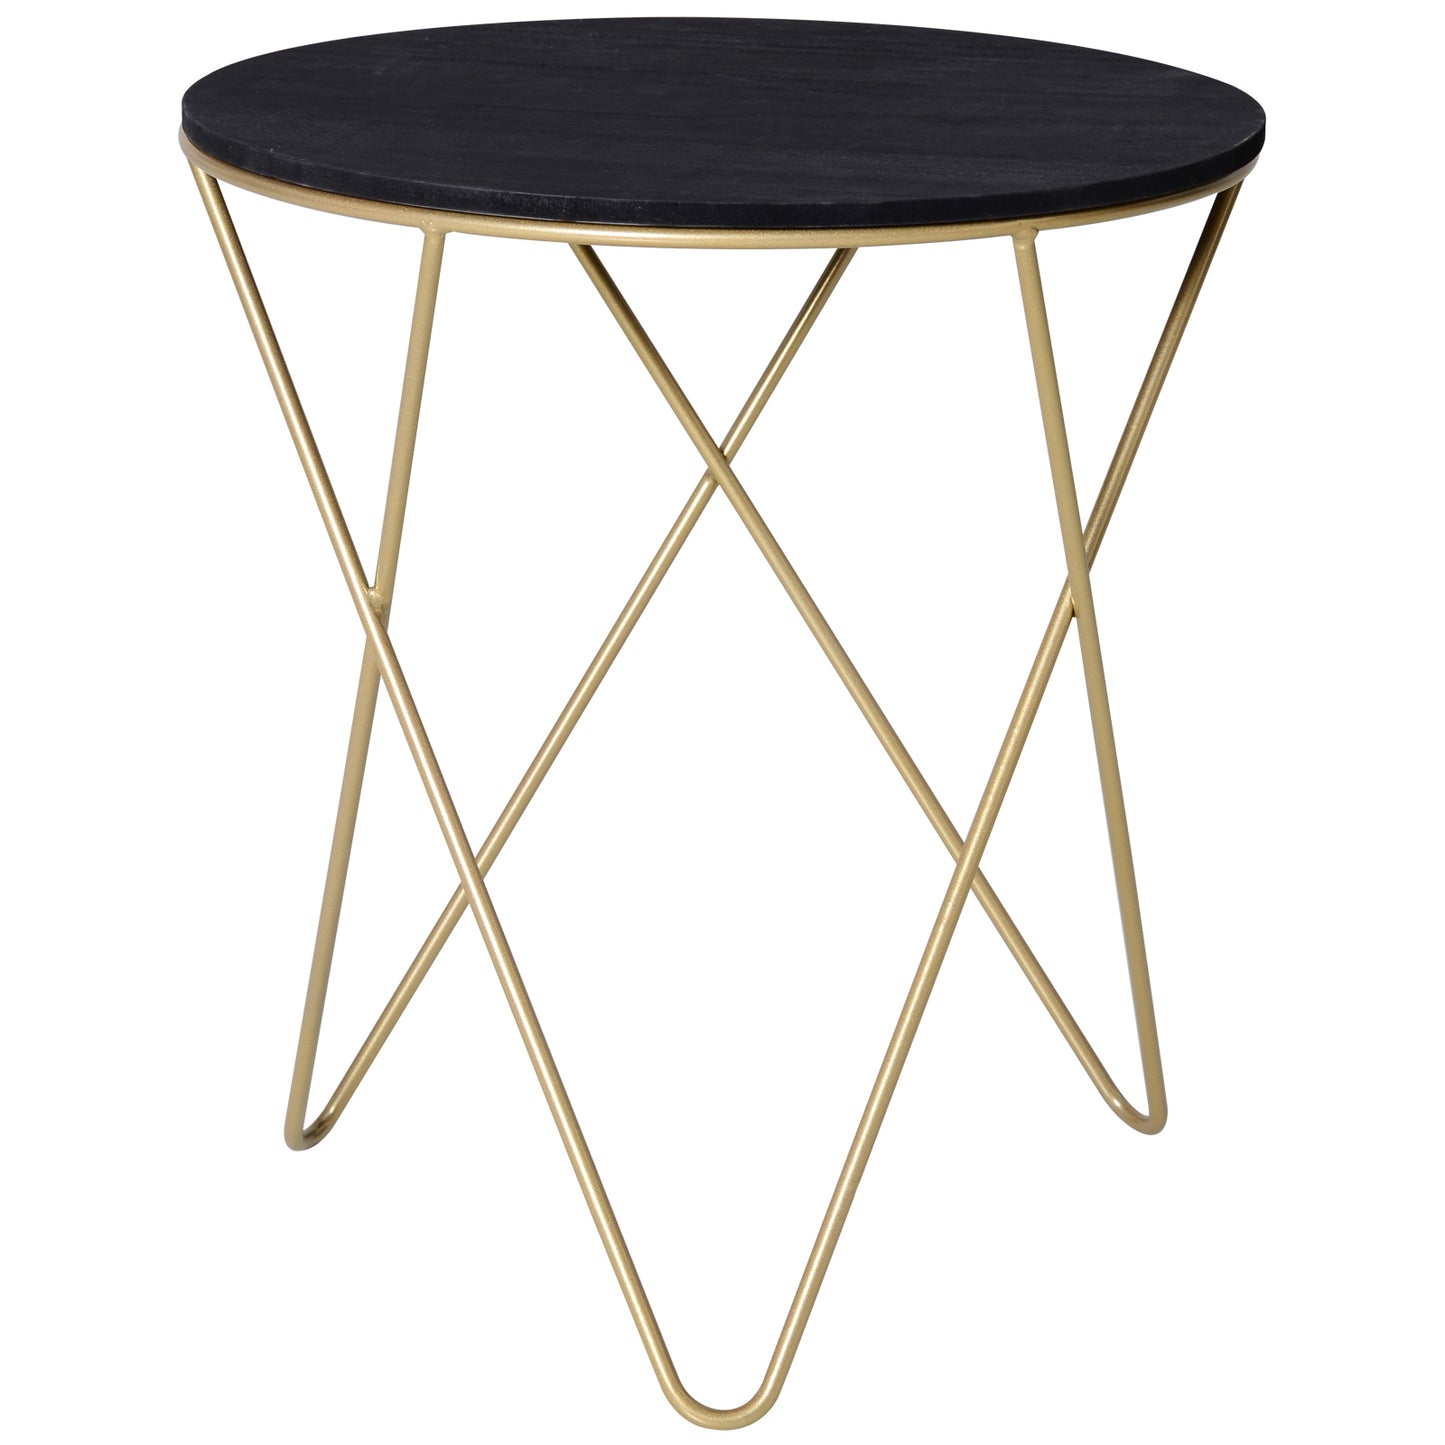 Wooden Metal Coffee Table, Sofa End Side Bedside Table Modern Style, Round Table, Black Gold Color (43cm), HOMCOM, 8